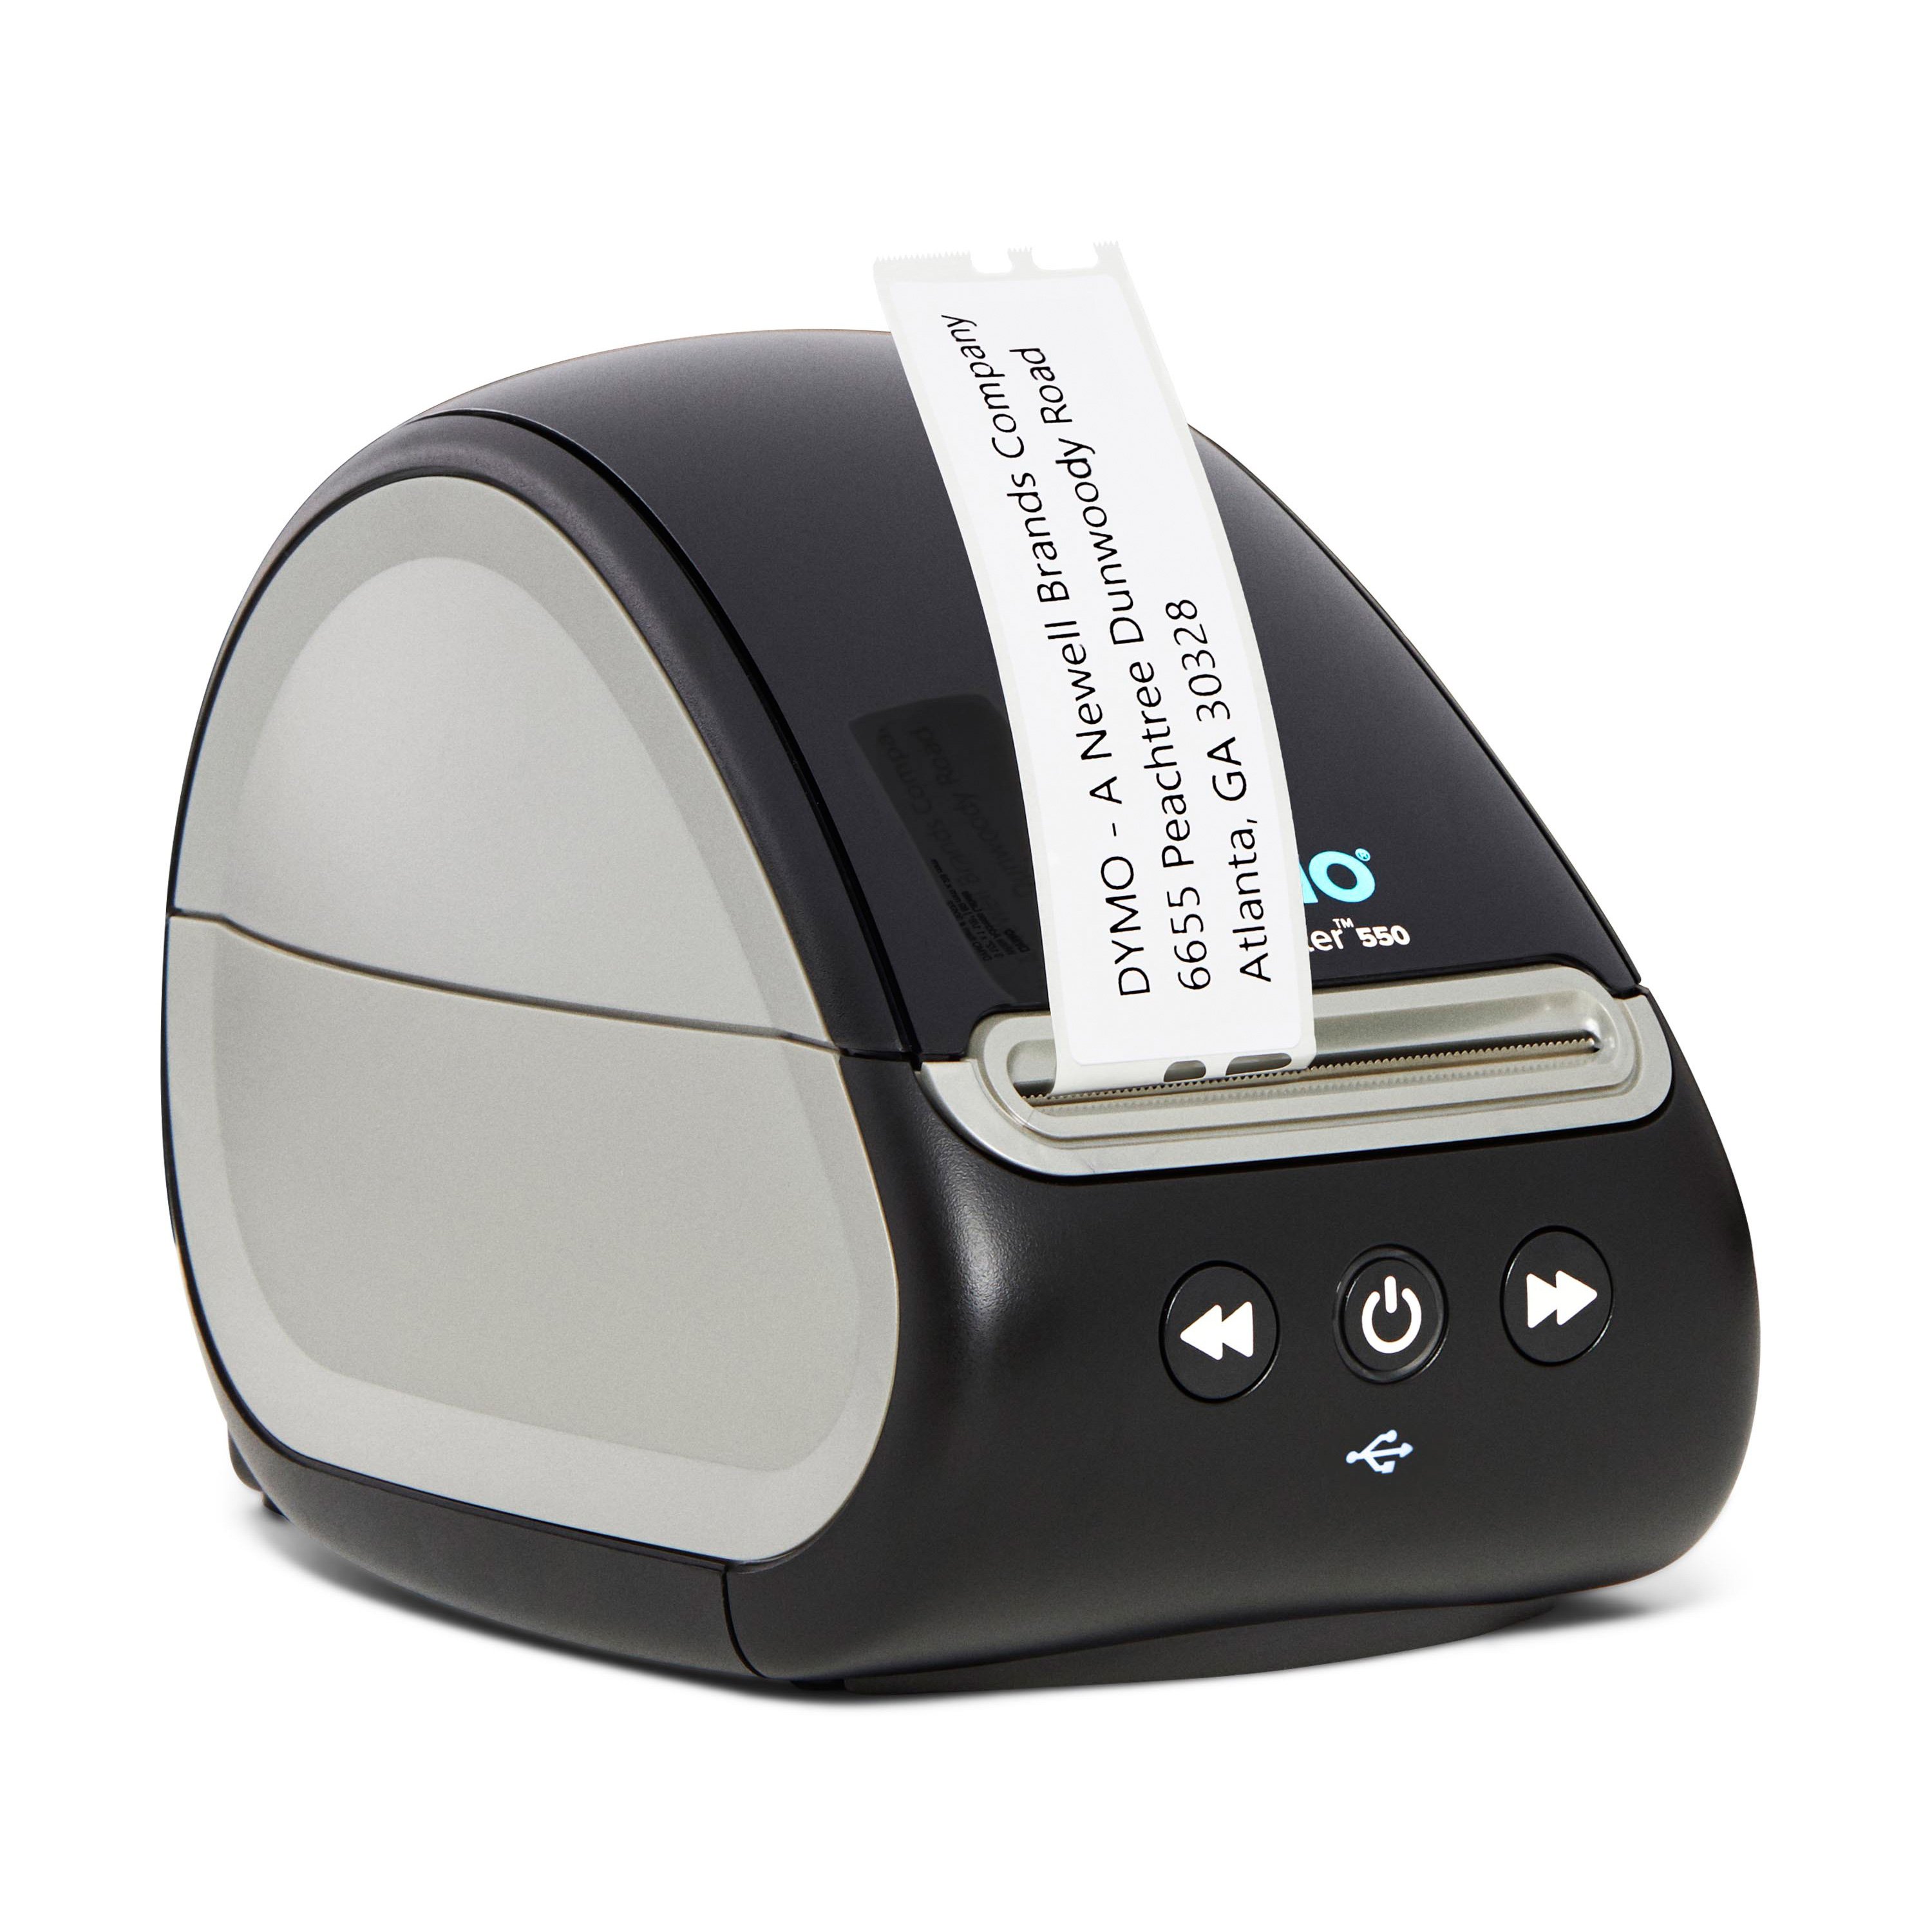 Dymo XTL 300 Label Thermal Printer for sale online 